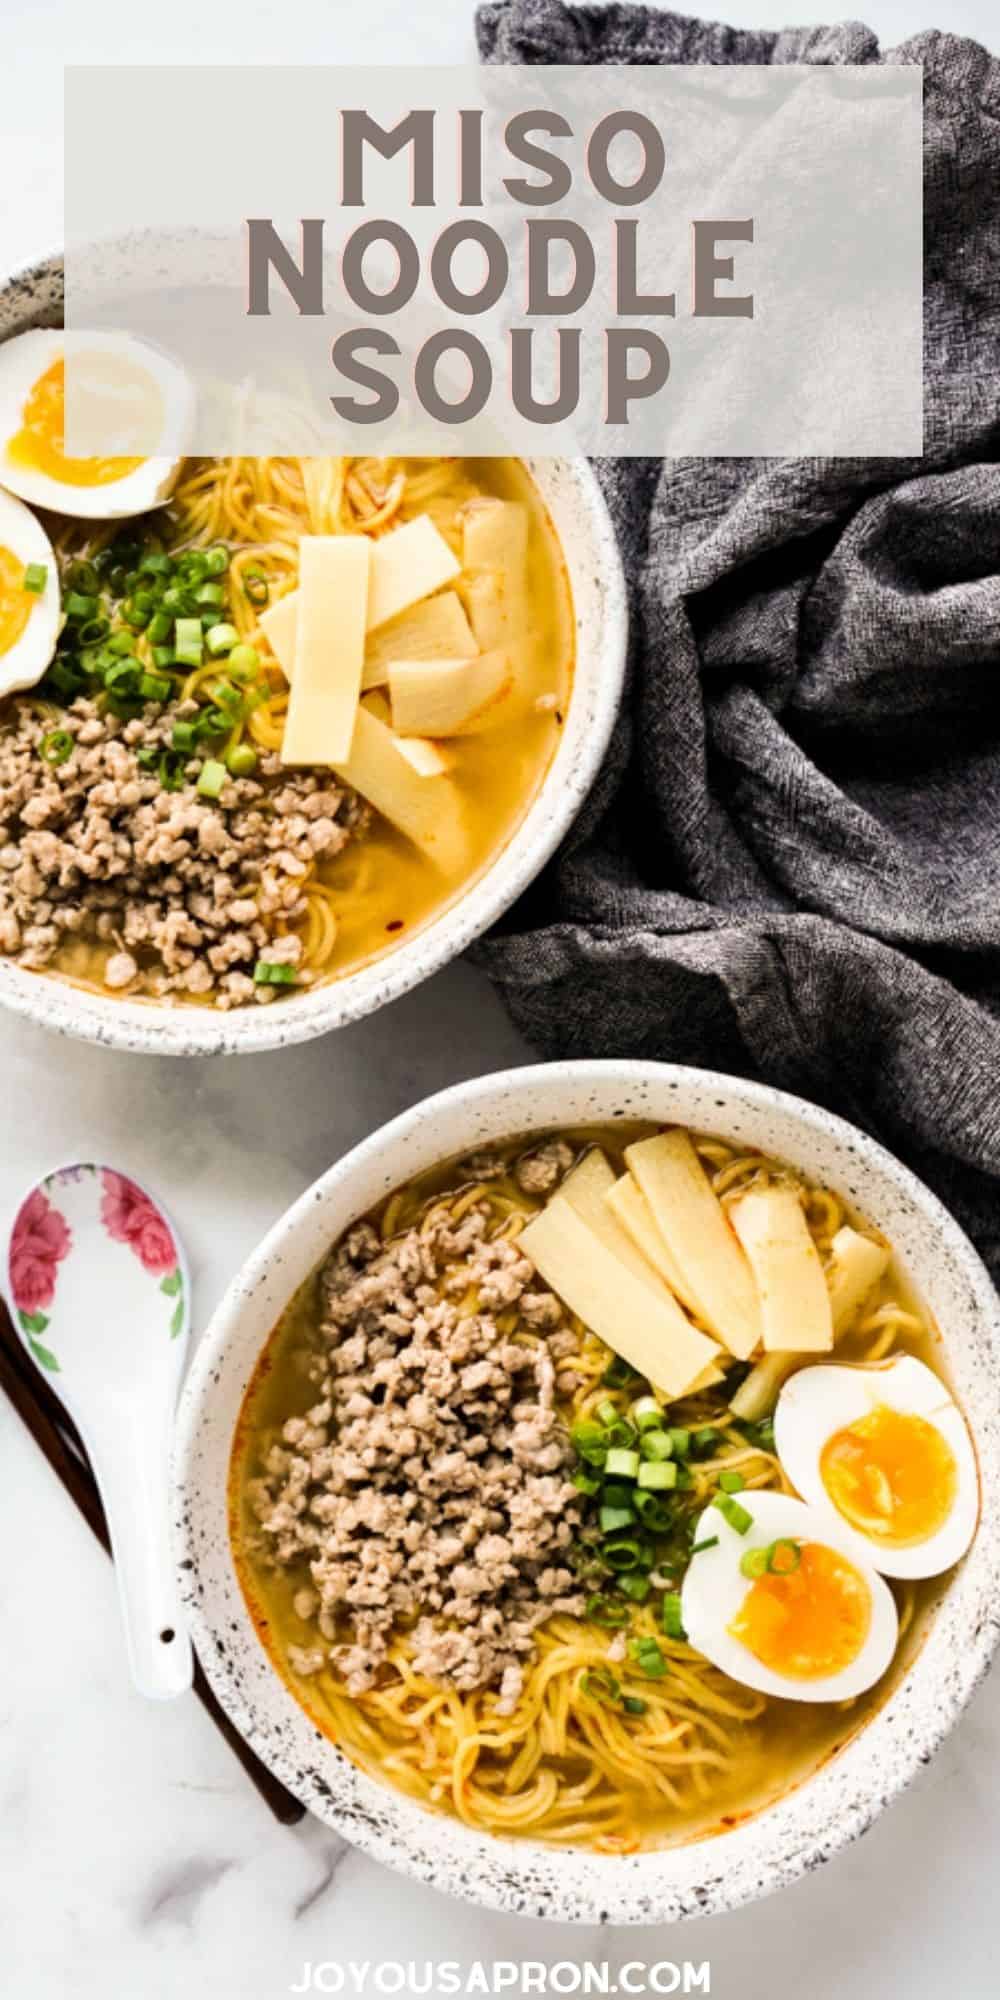 Miso Ramen Noodle Soup - Ramen noodles in a flavorful spicy miso broth, combined with seasoned ground pork, bamboo shoots, soft boiled egg and green onions. A delicious Miso Noodle Soup recipe just like Miso Ramen from your favorite Japanese restaurants. via @joyousapron